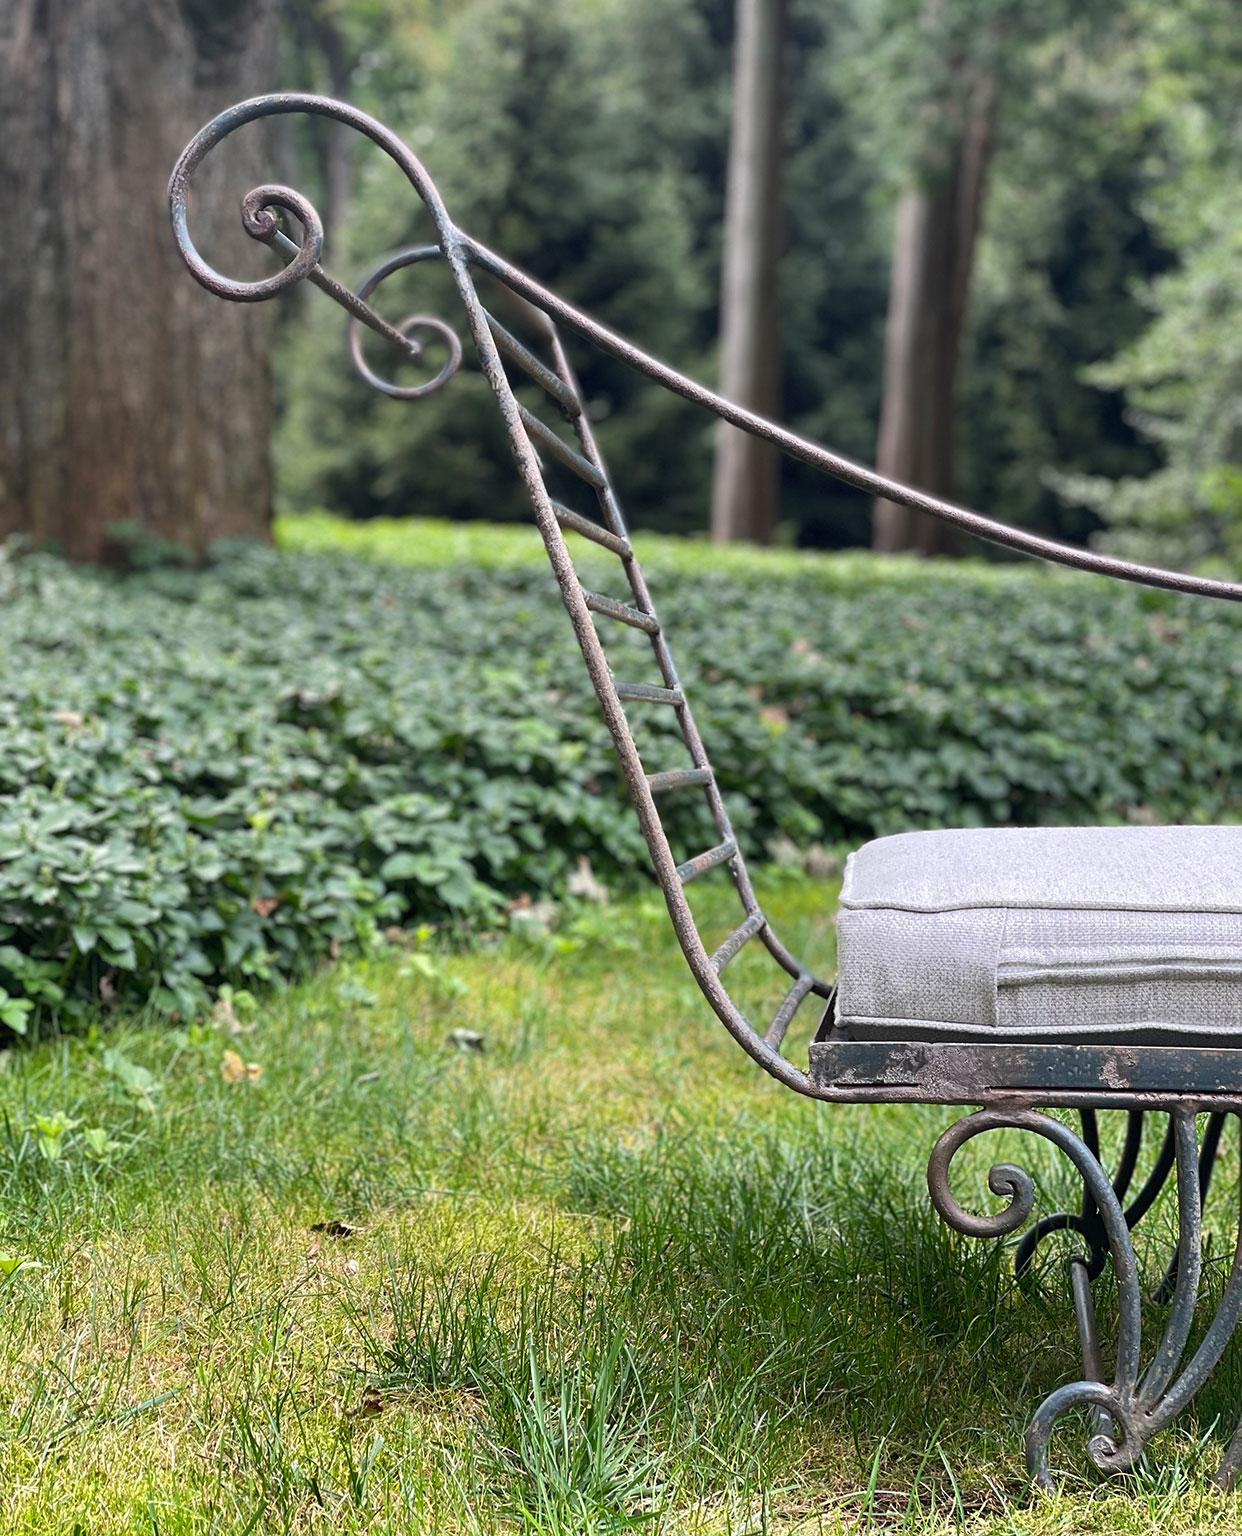 American Pair of Wrought-Iron Chaises with Sunbrella-Covered Cushions